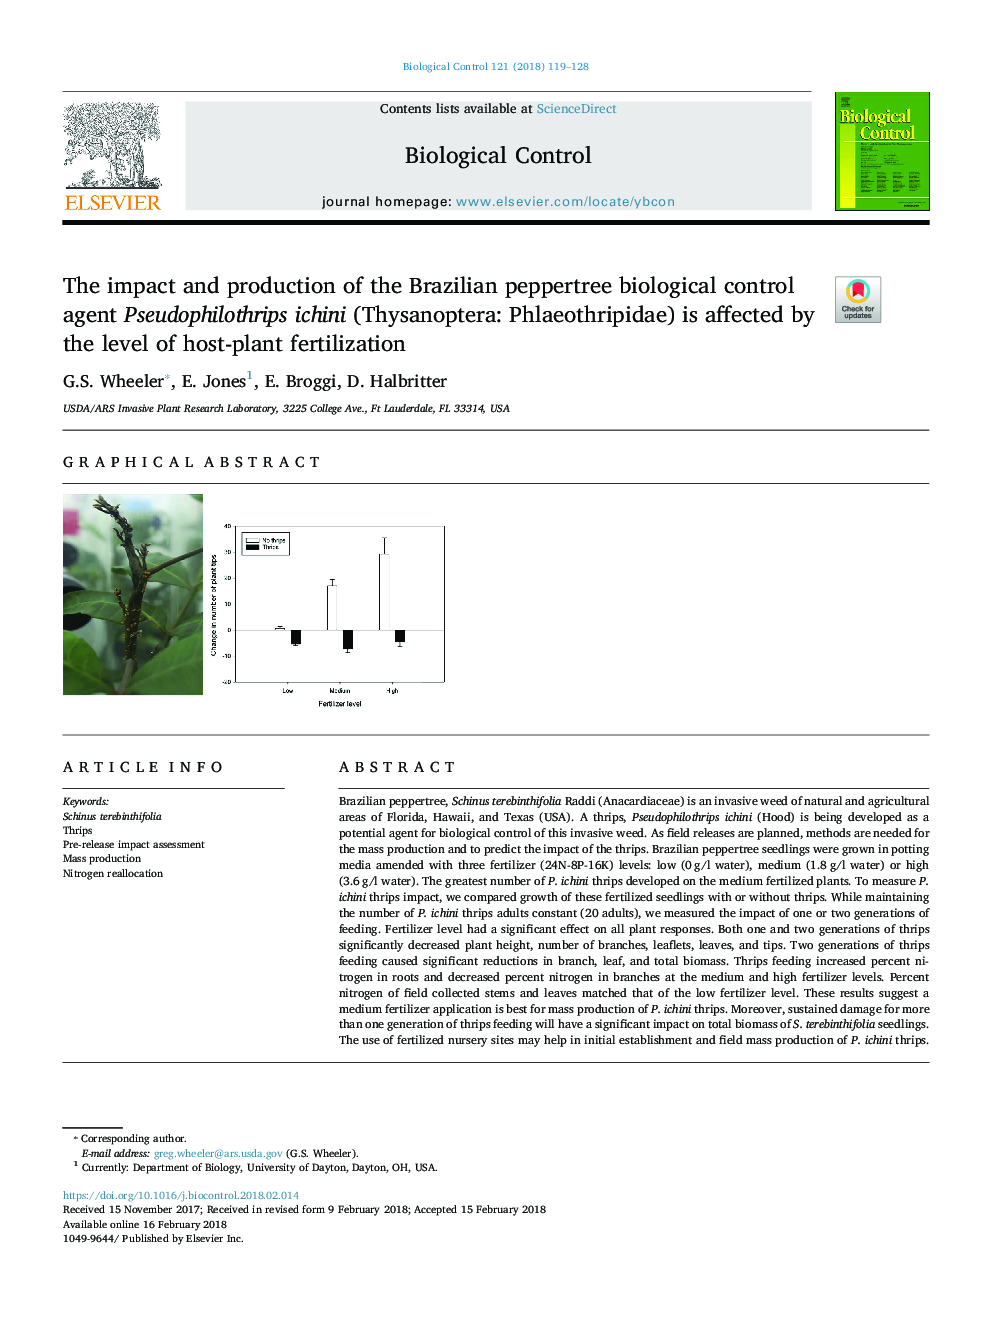 The impact and production of the Brazilian peppertree biological control agent Pseudophilothrips ichini (Thysanoptera: Phlaeothripidae) is affected by the level of host-plant fertilization